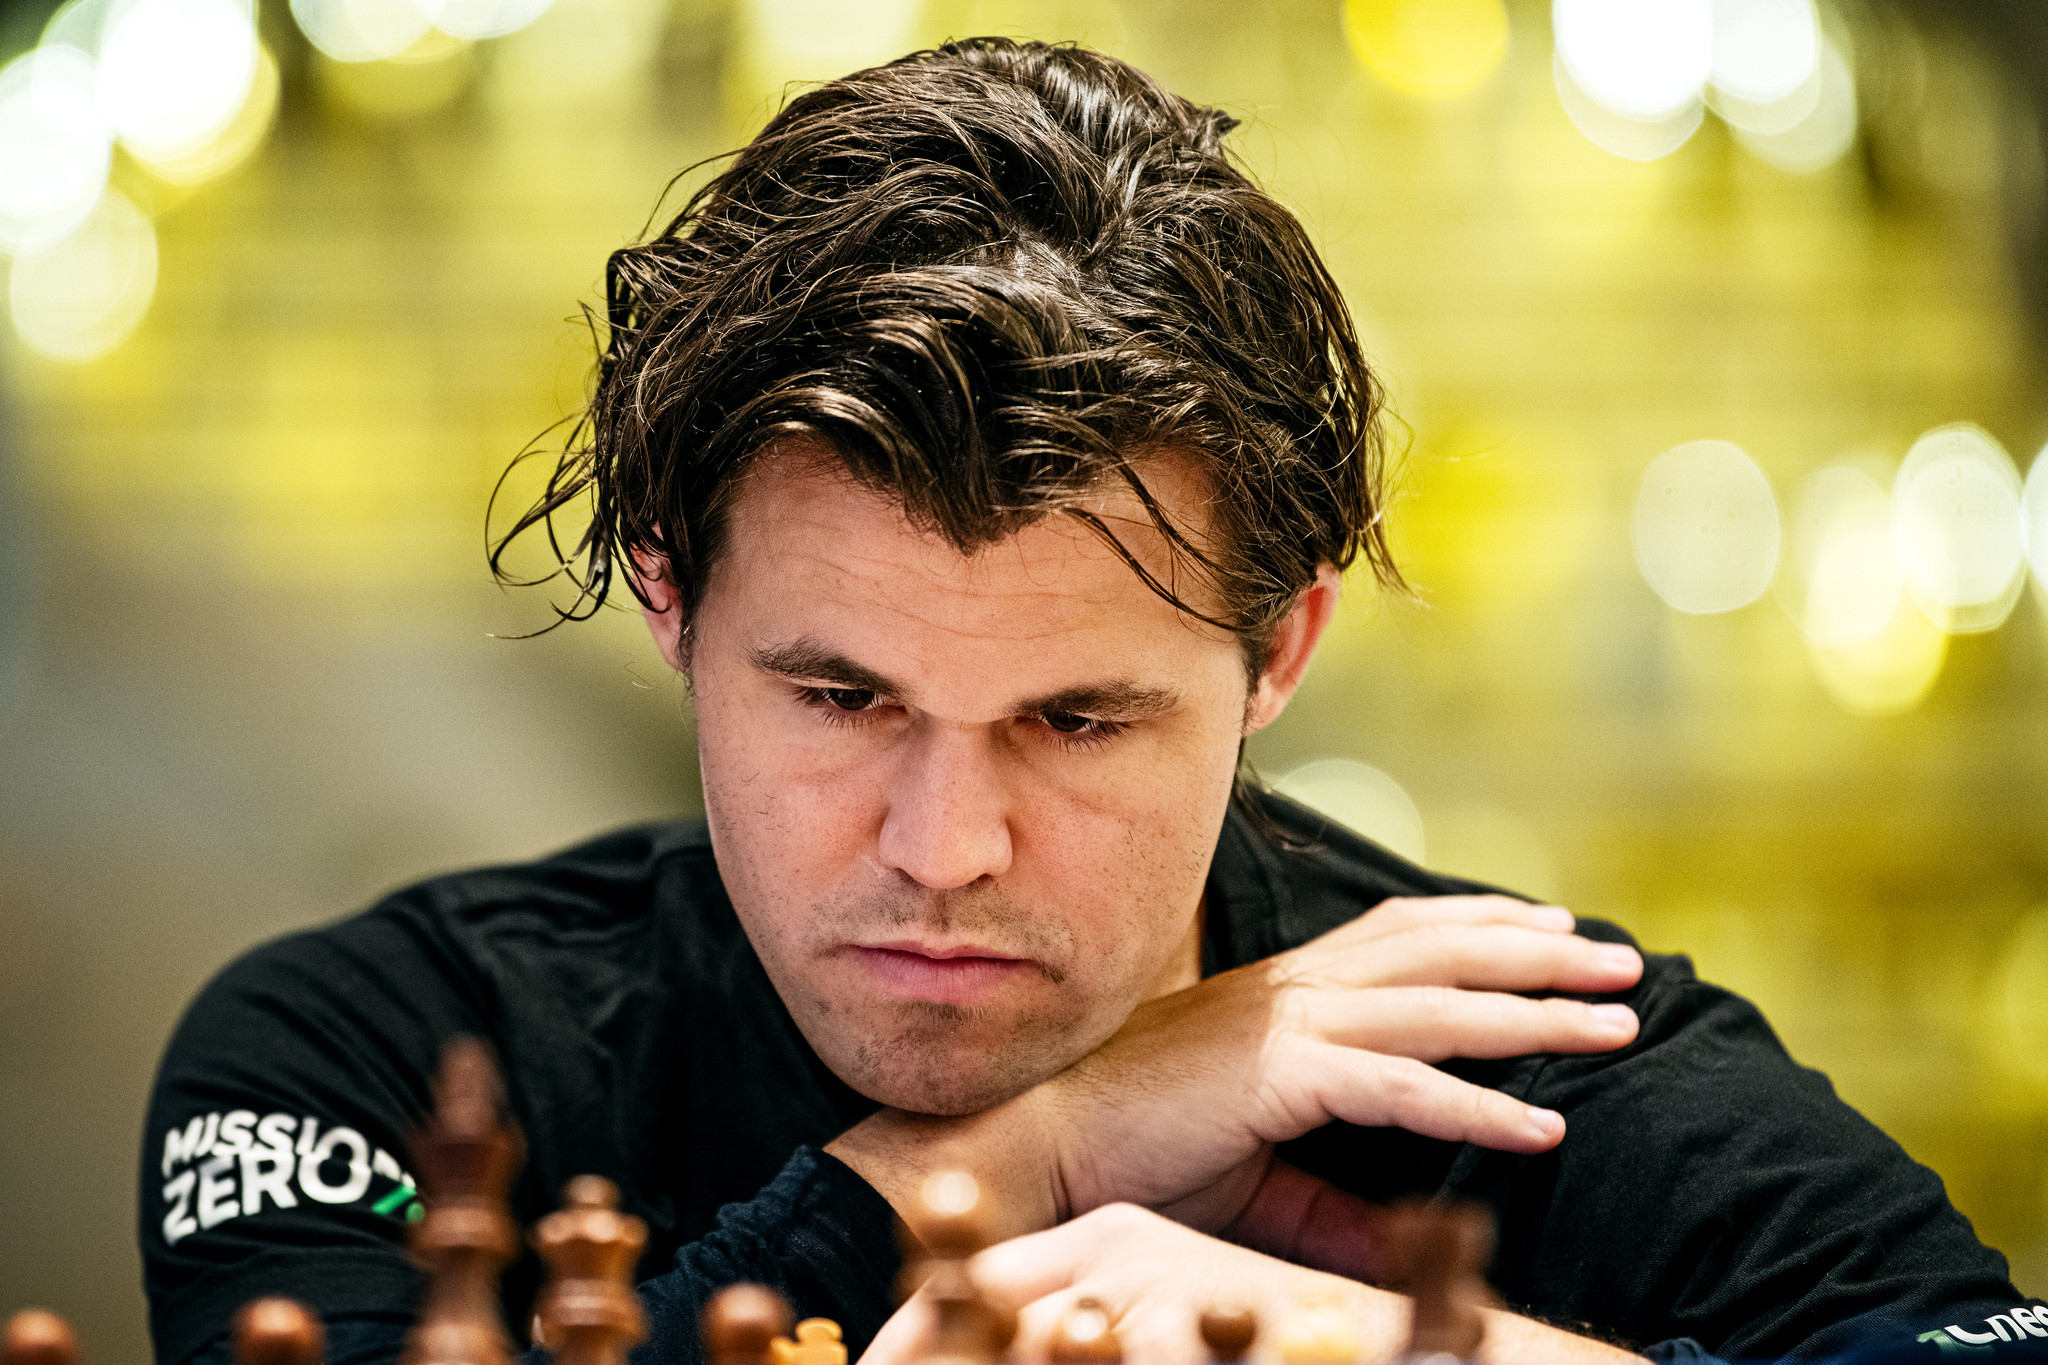 International Chess Federation on X: Magnus Carlsen prevails with black in  the first rapid game of the Final tiebreak, leaving Praggnanandhaa in a  must-win situation. Will the world #1 win his first #